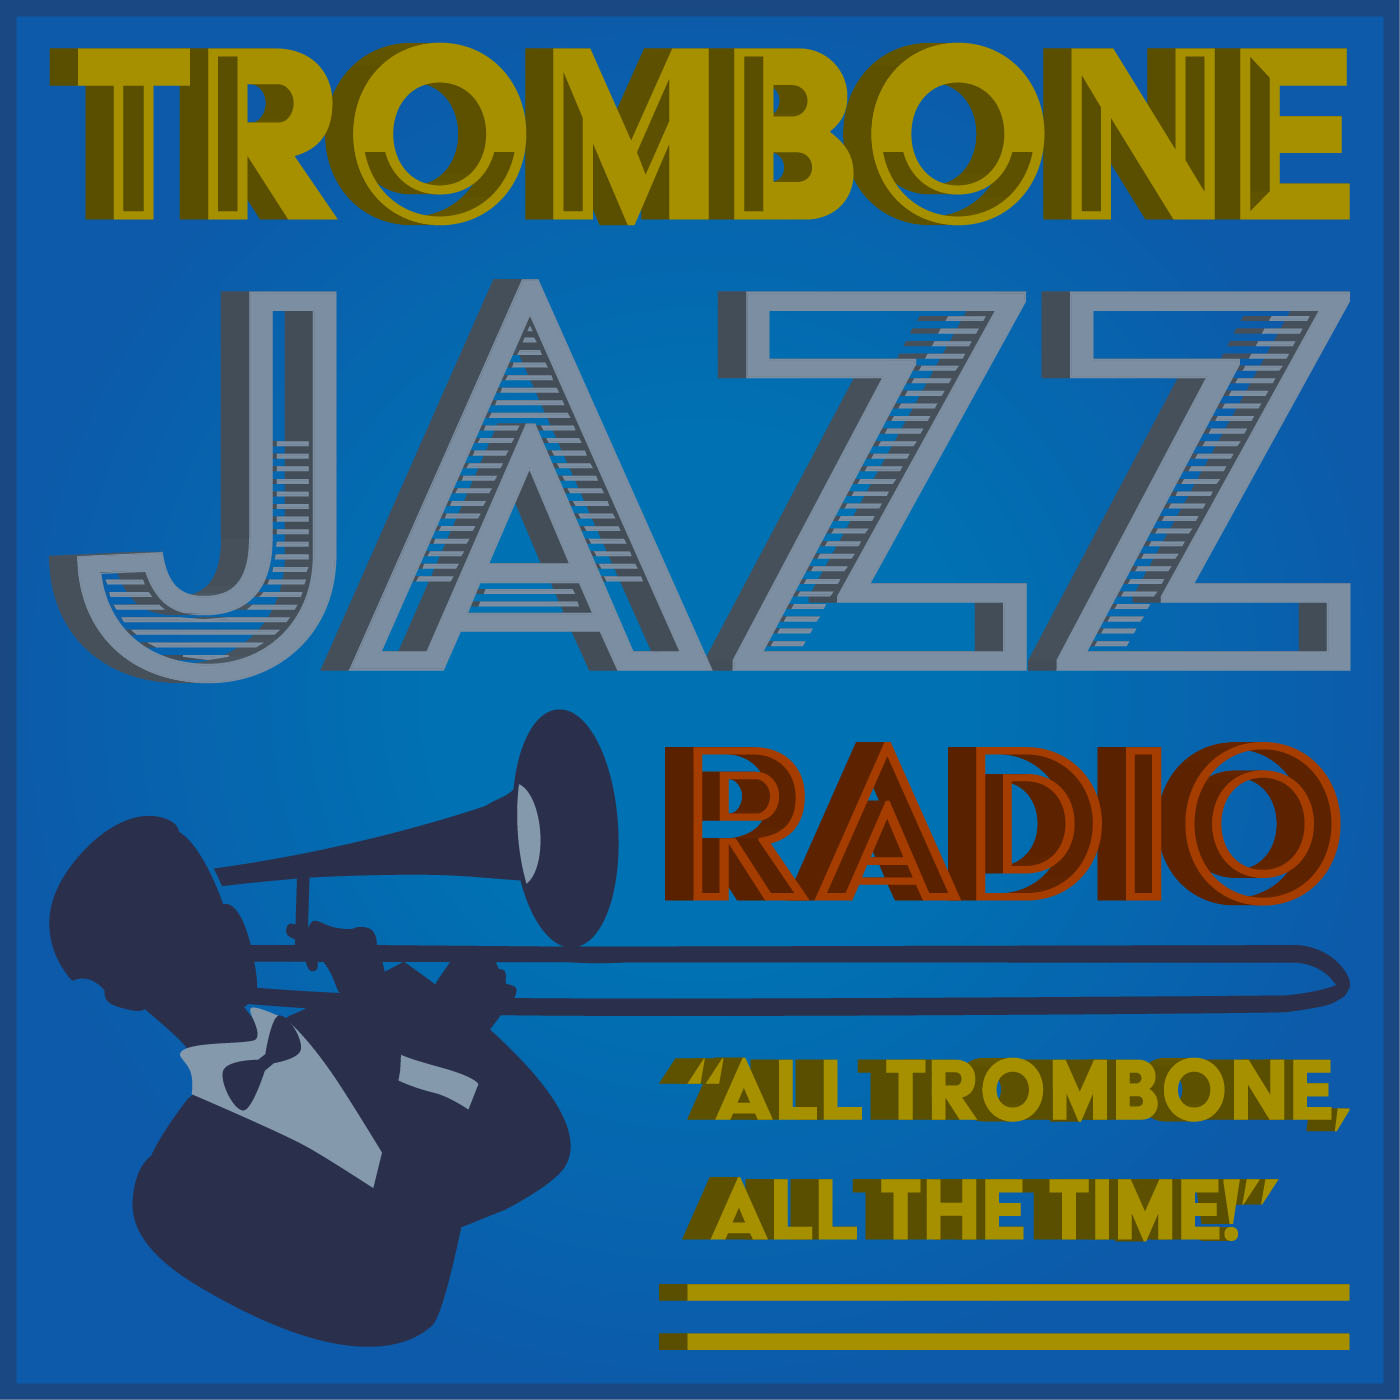 Art for Trombone Jazz Radio - All Trombone, All the Time by Christopher Louis